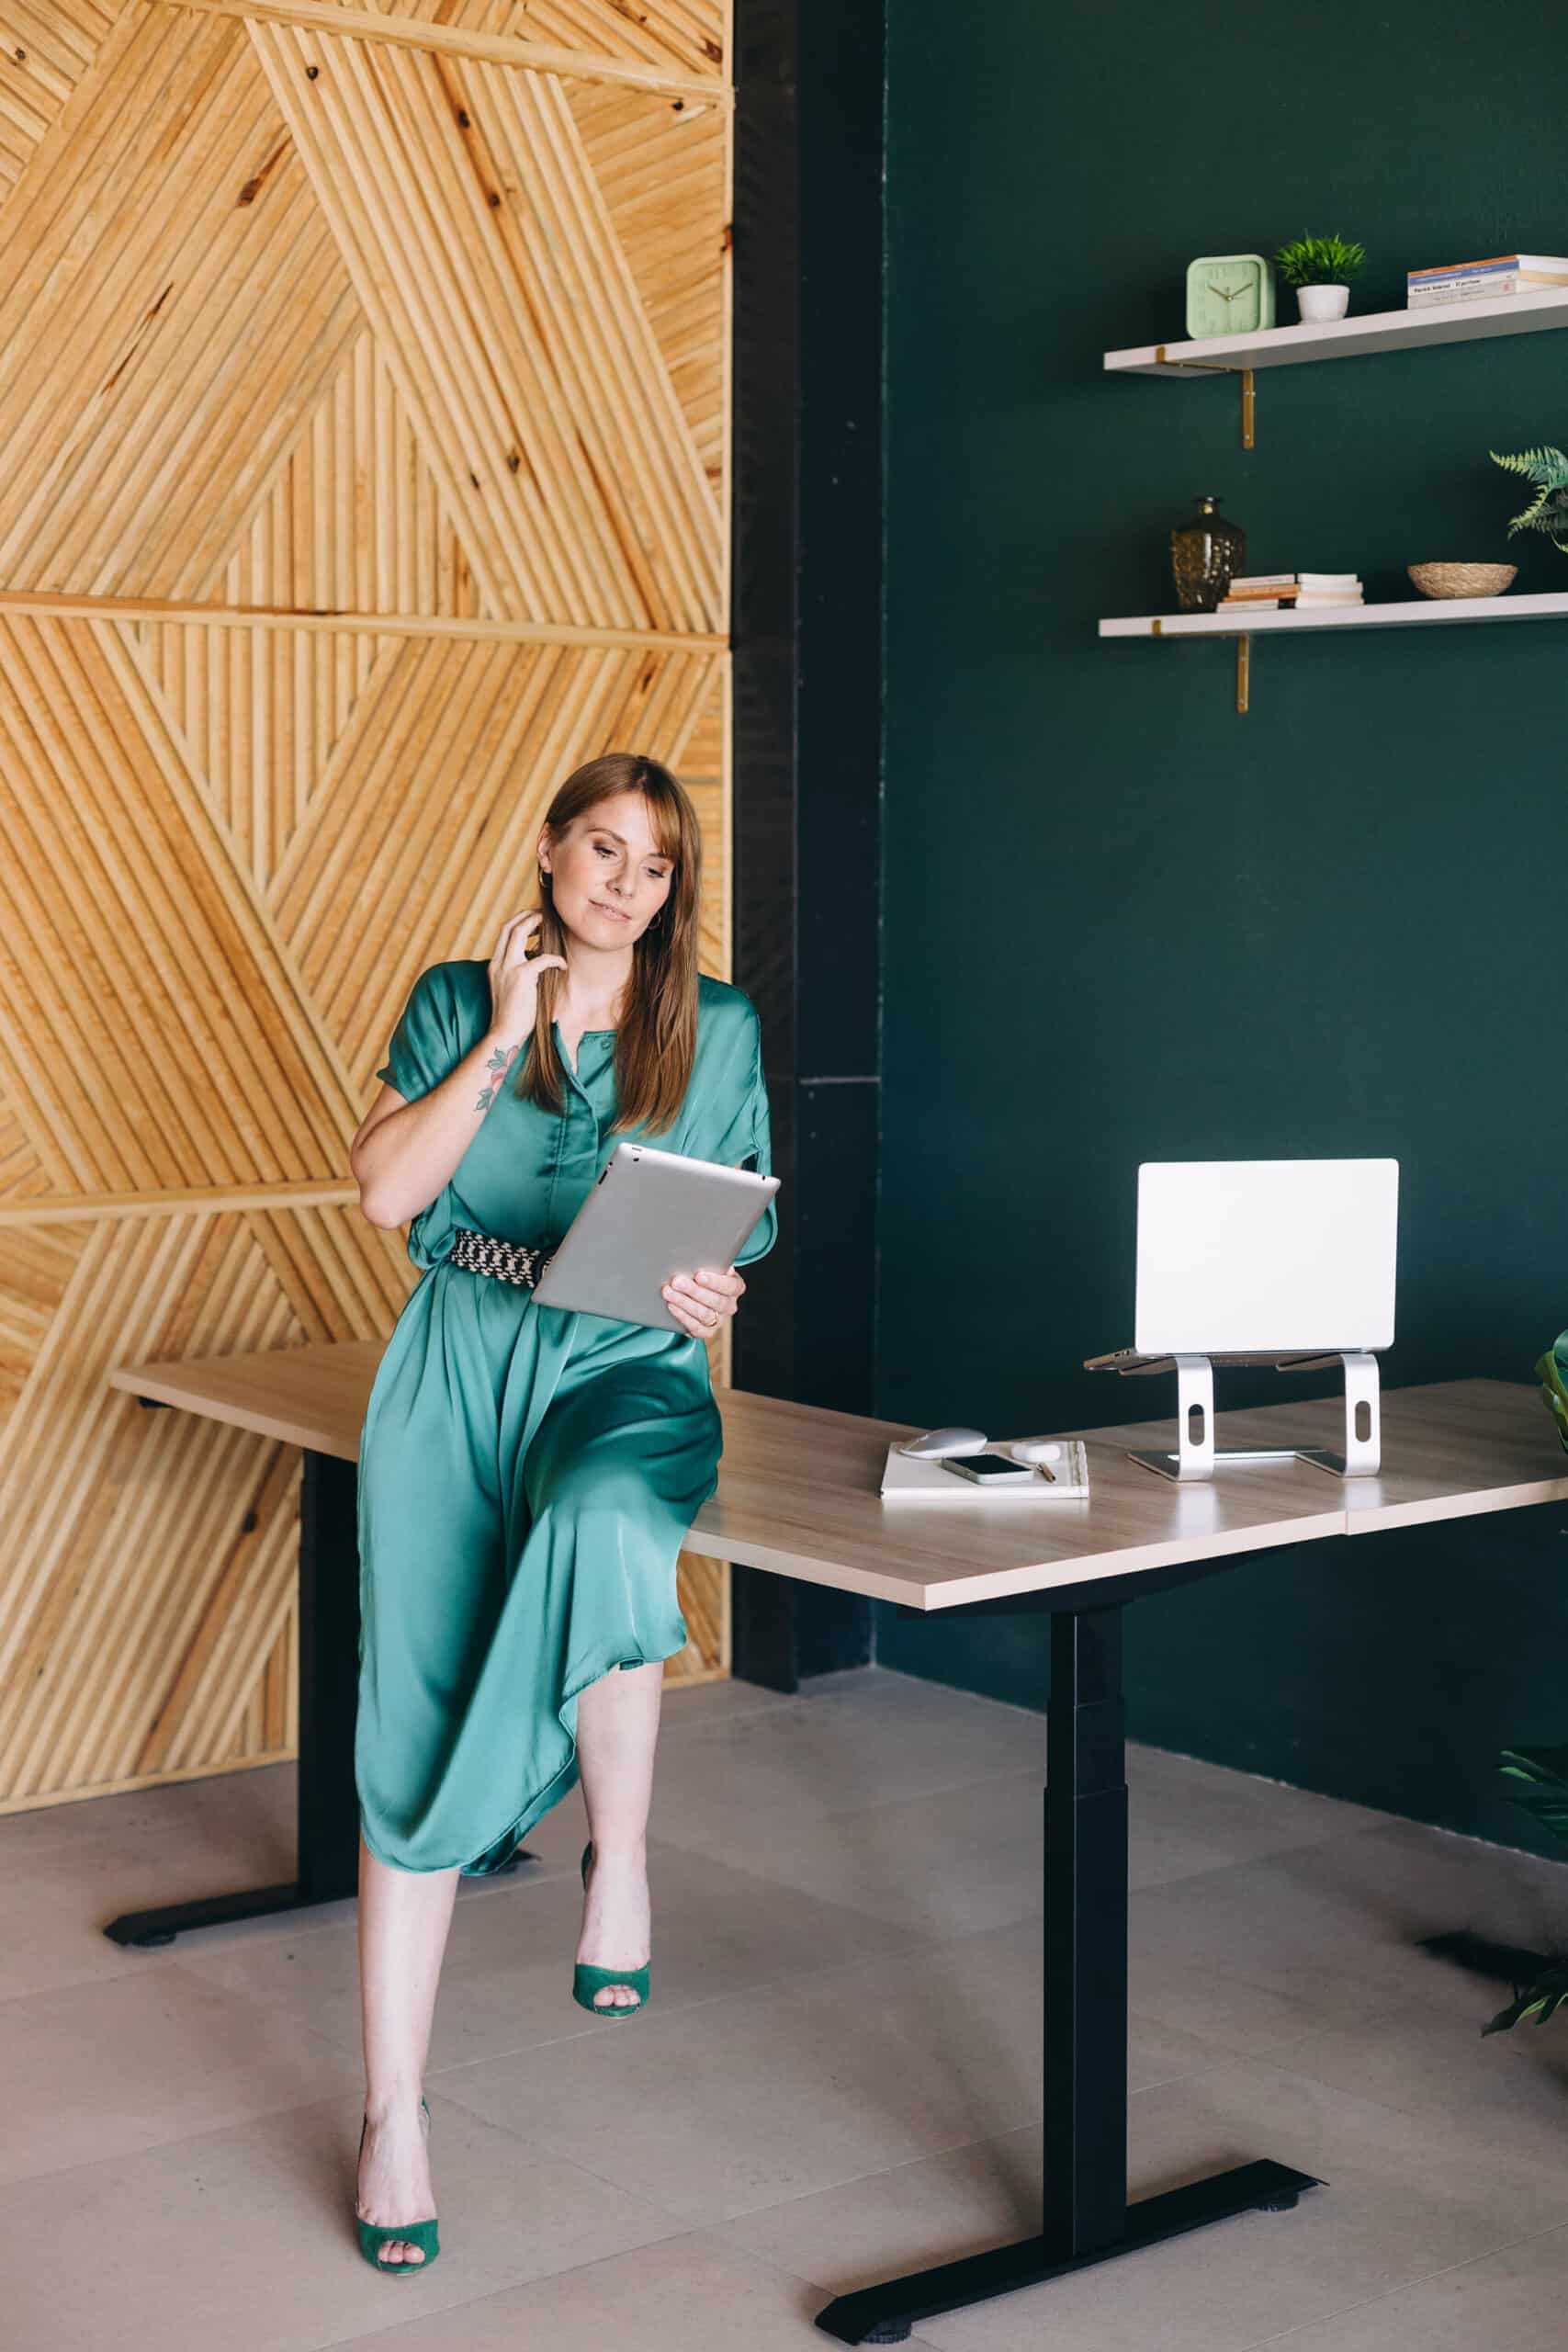 A woman in a green dress and matching heels is sitting casually on a desk, holding a tablet and talking on the phone in a modern office with wooden geometric wall decor and minimalistic shelves.